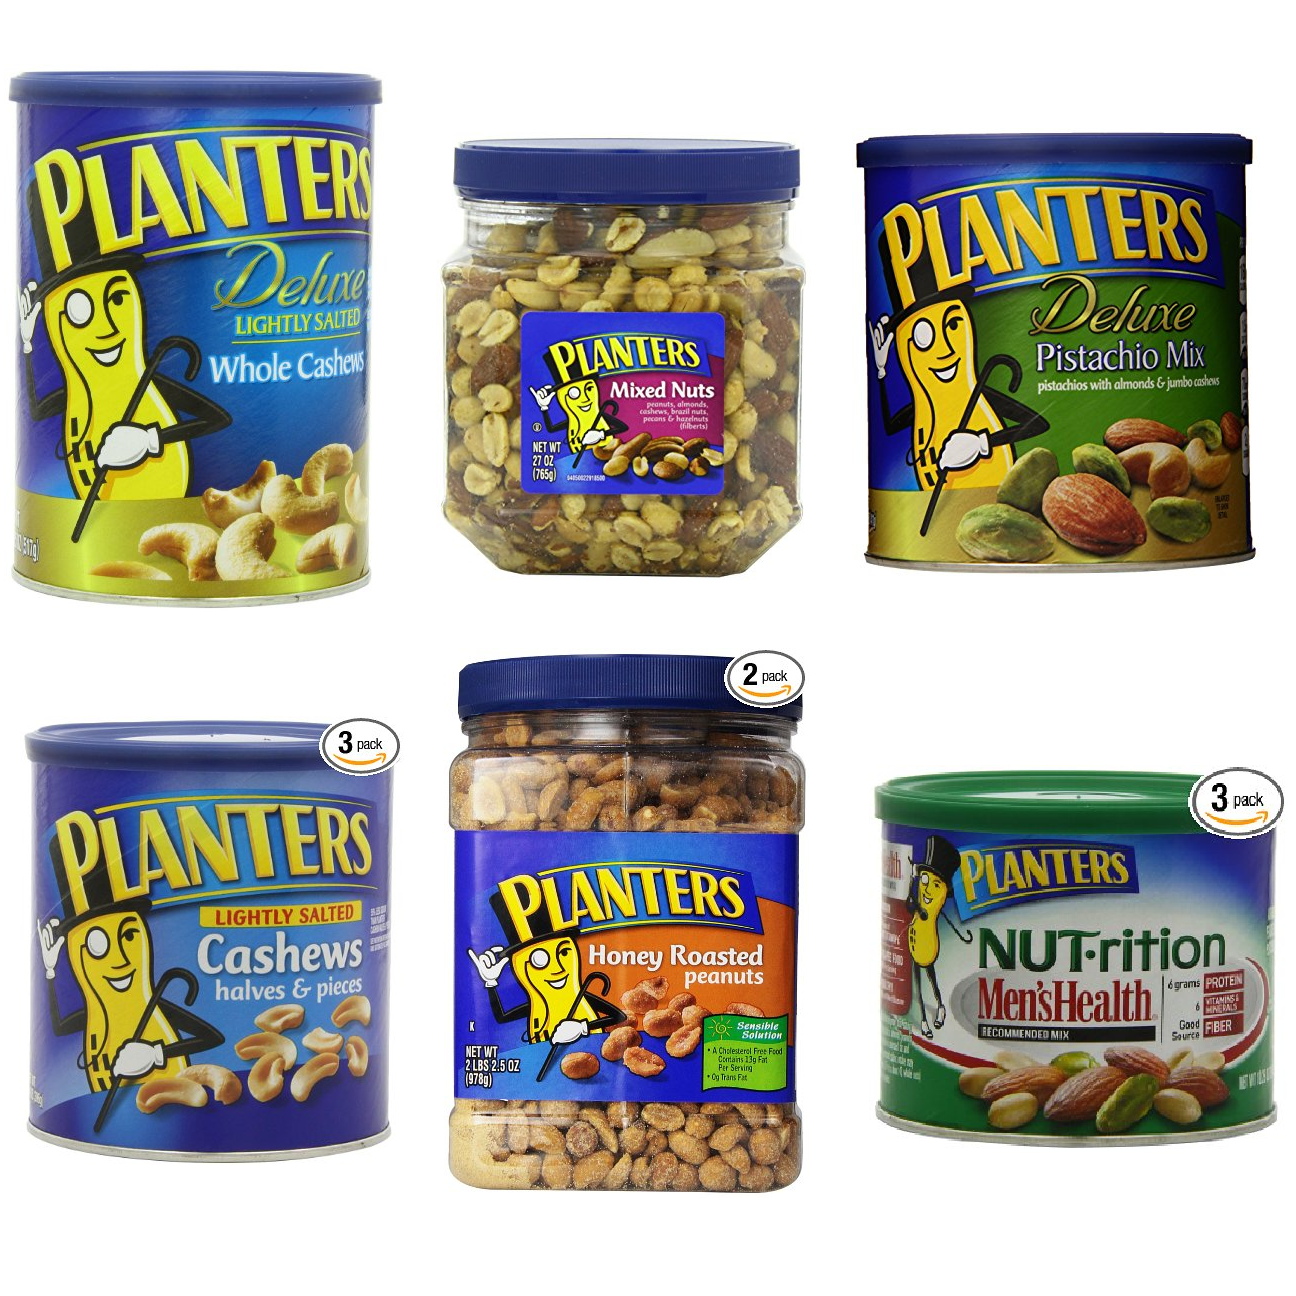 Planters Nuts Deals Happening on Amazon! Save 25% Off Select Containers + FREE Shipping!